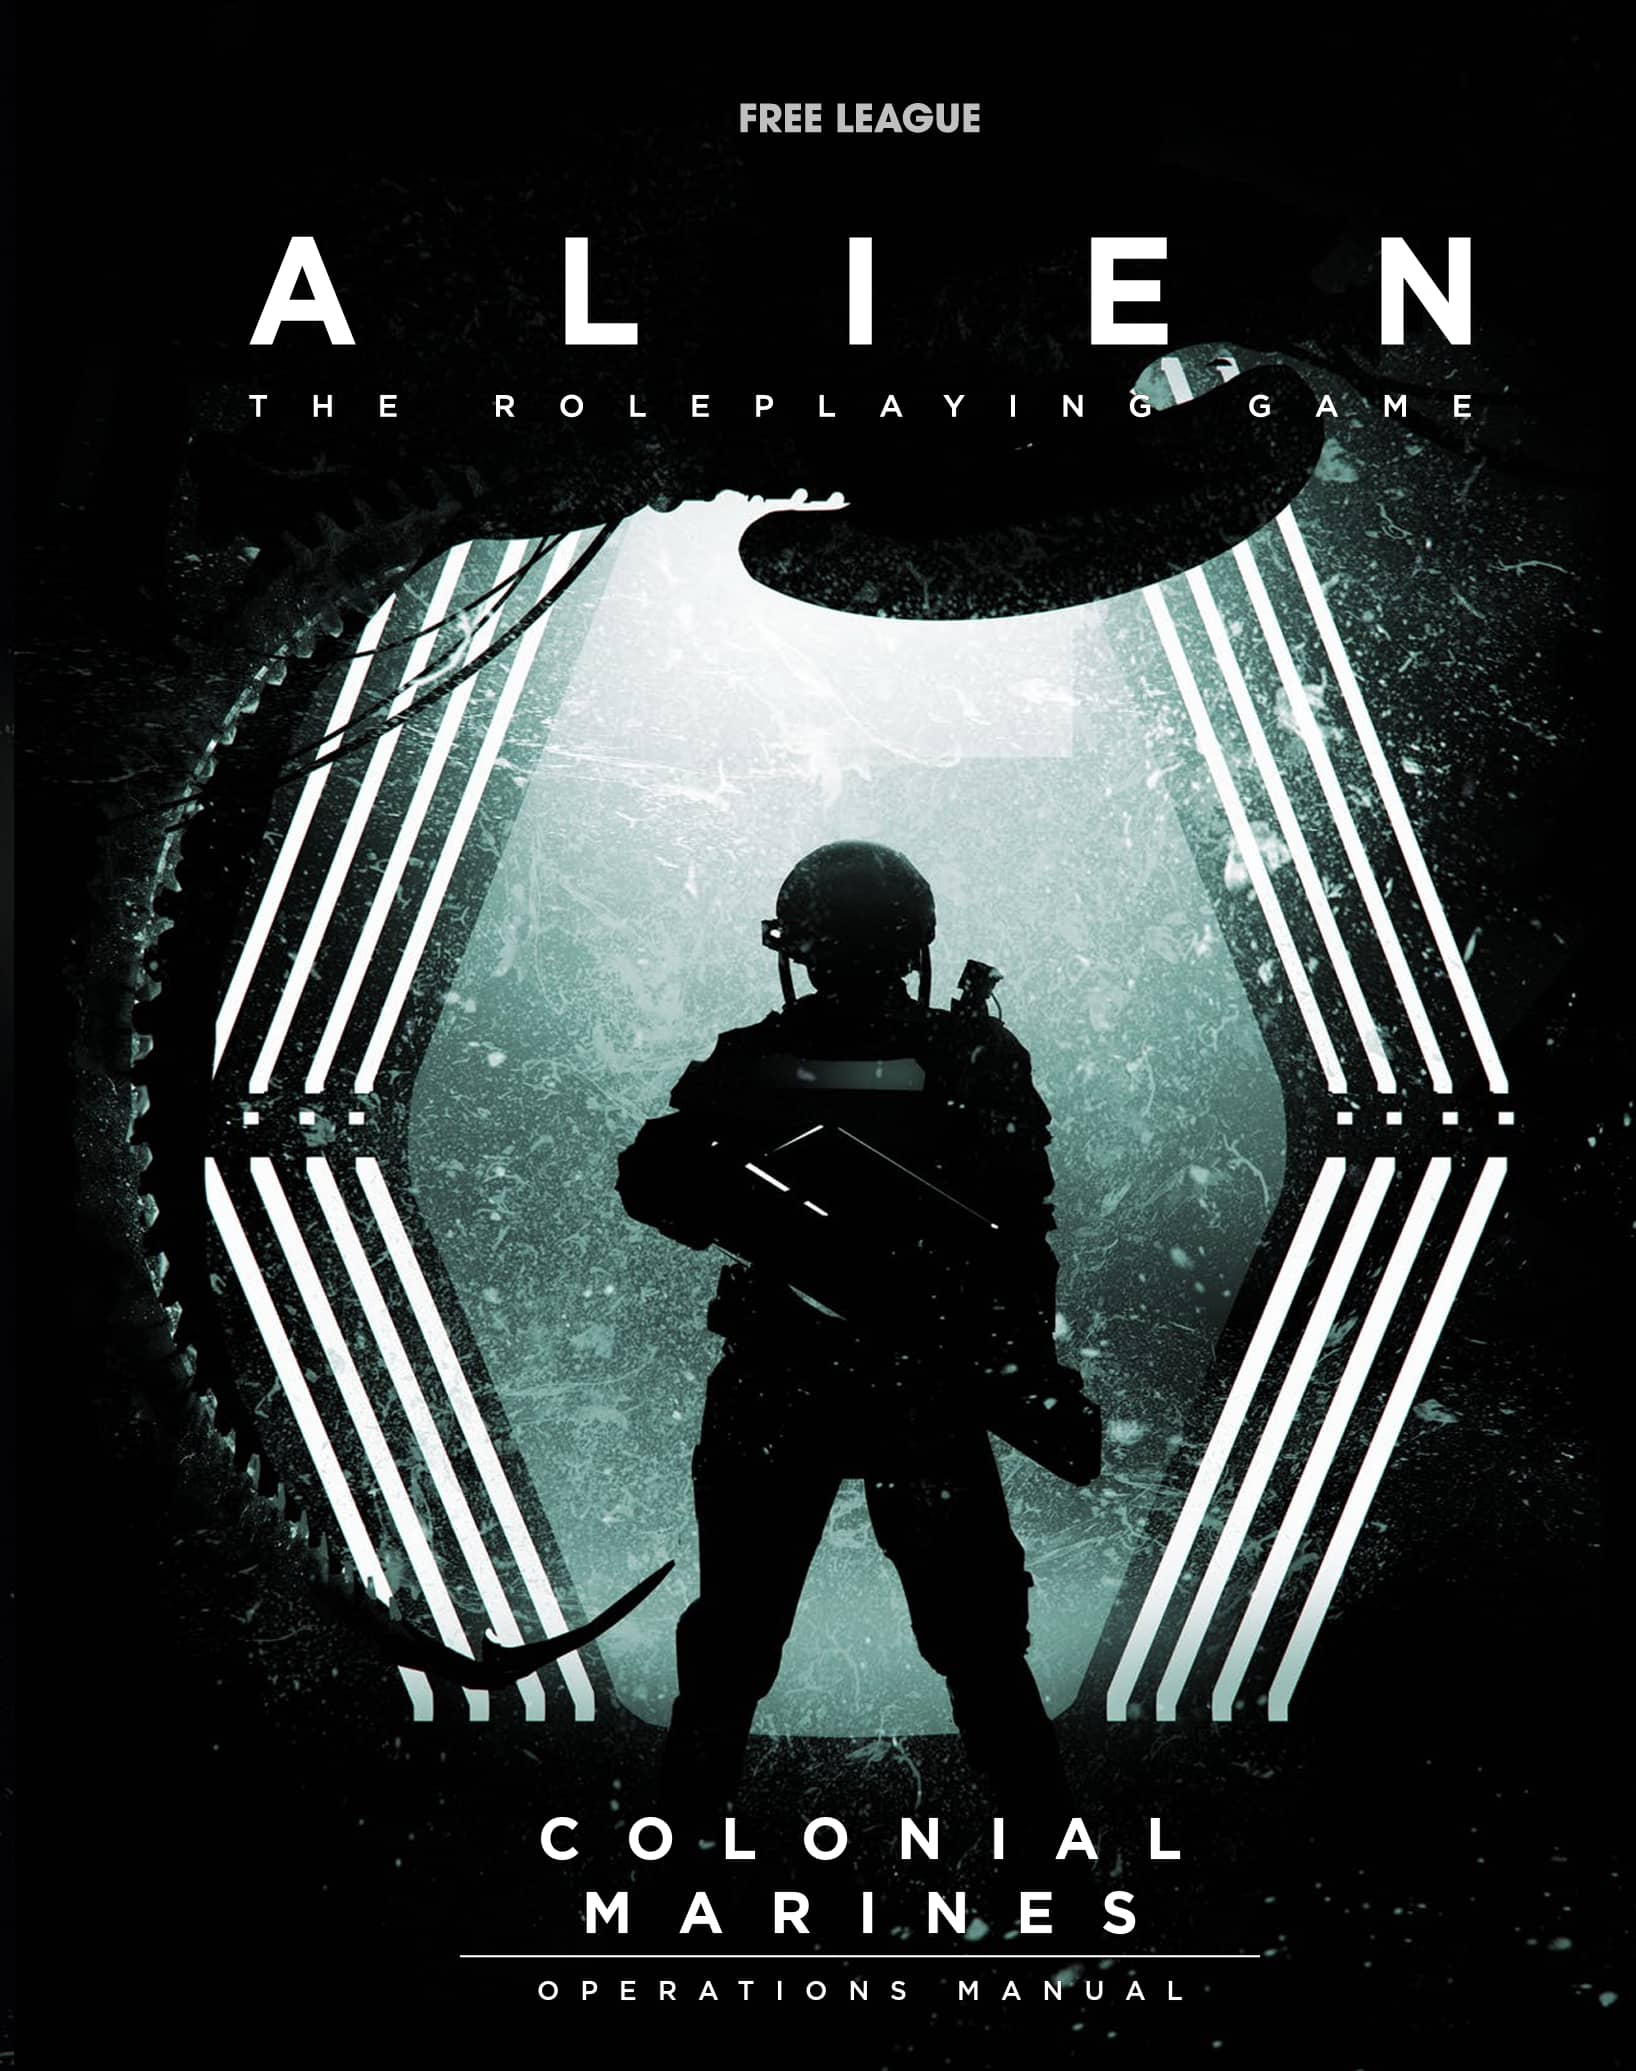 Join the Corps! The Colonial Marines Operations Manual for Alien: The  Roleplaying Game â€“ Black Gate